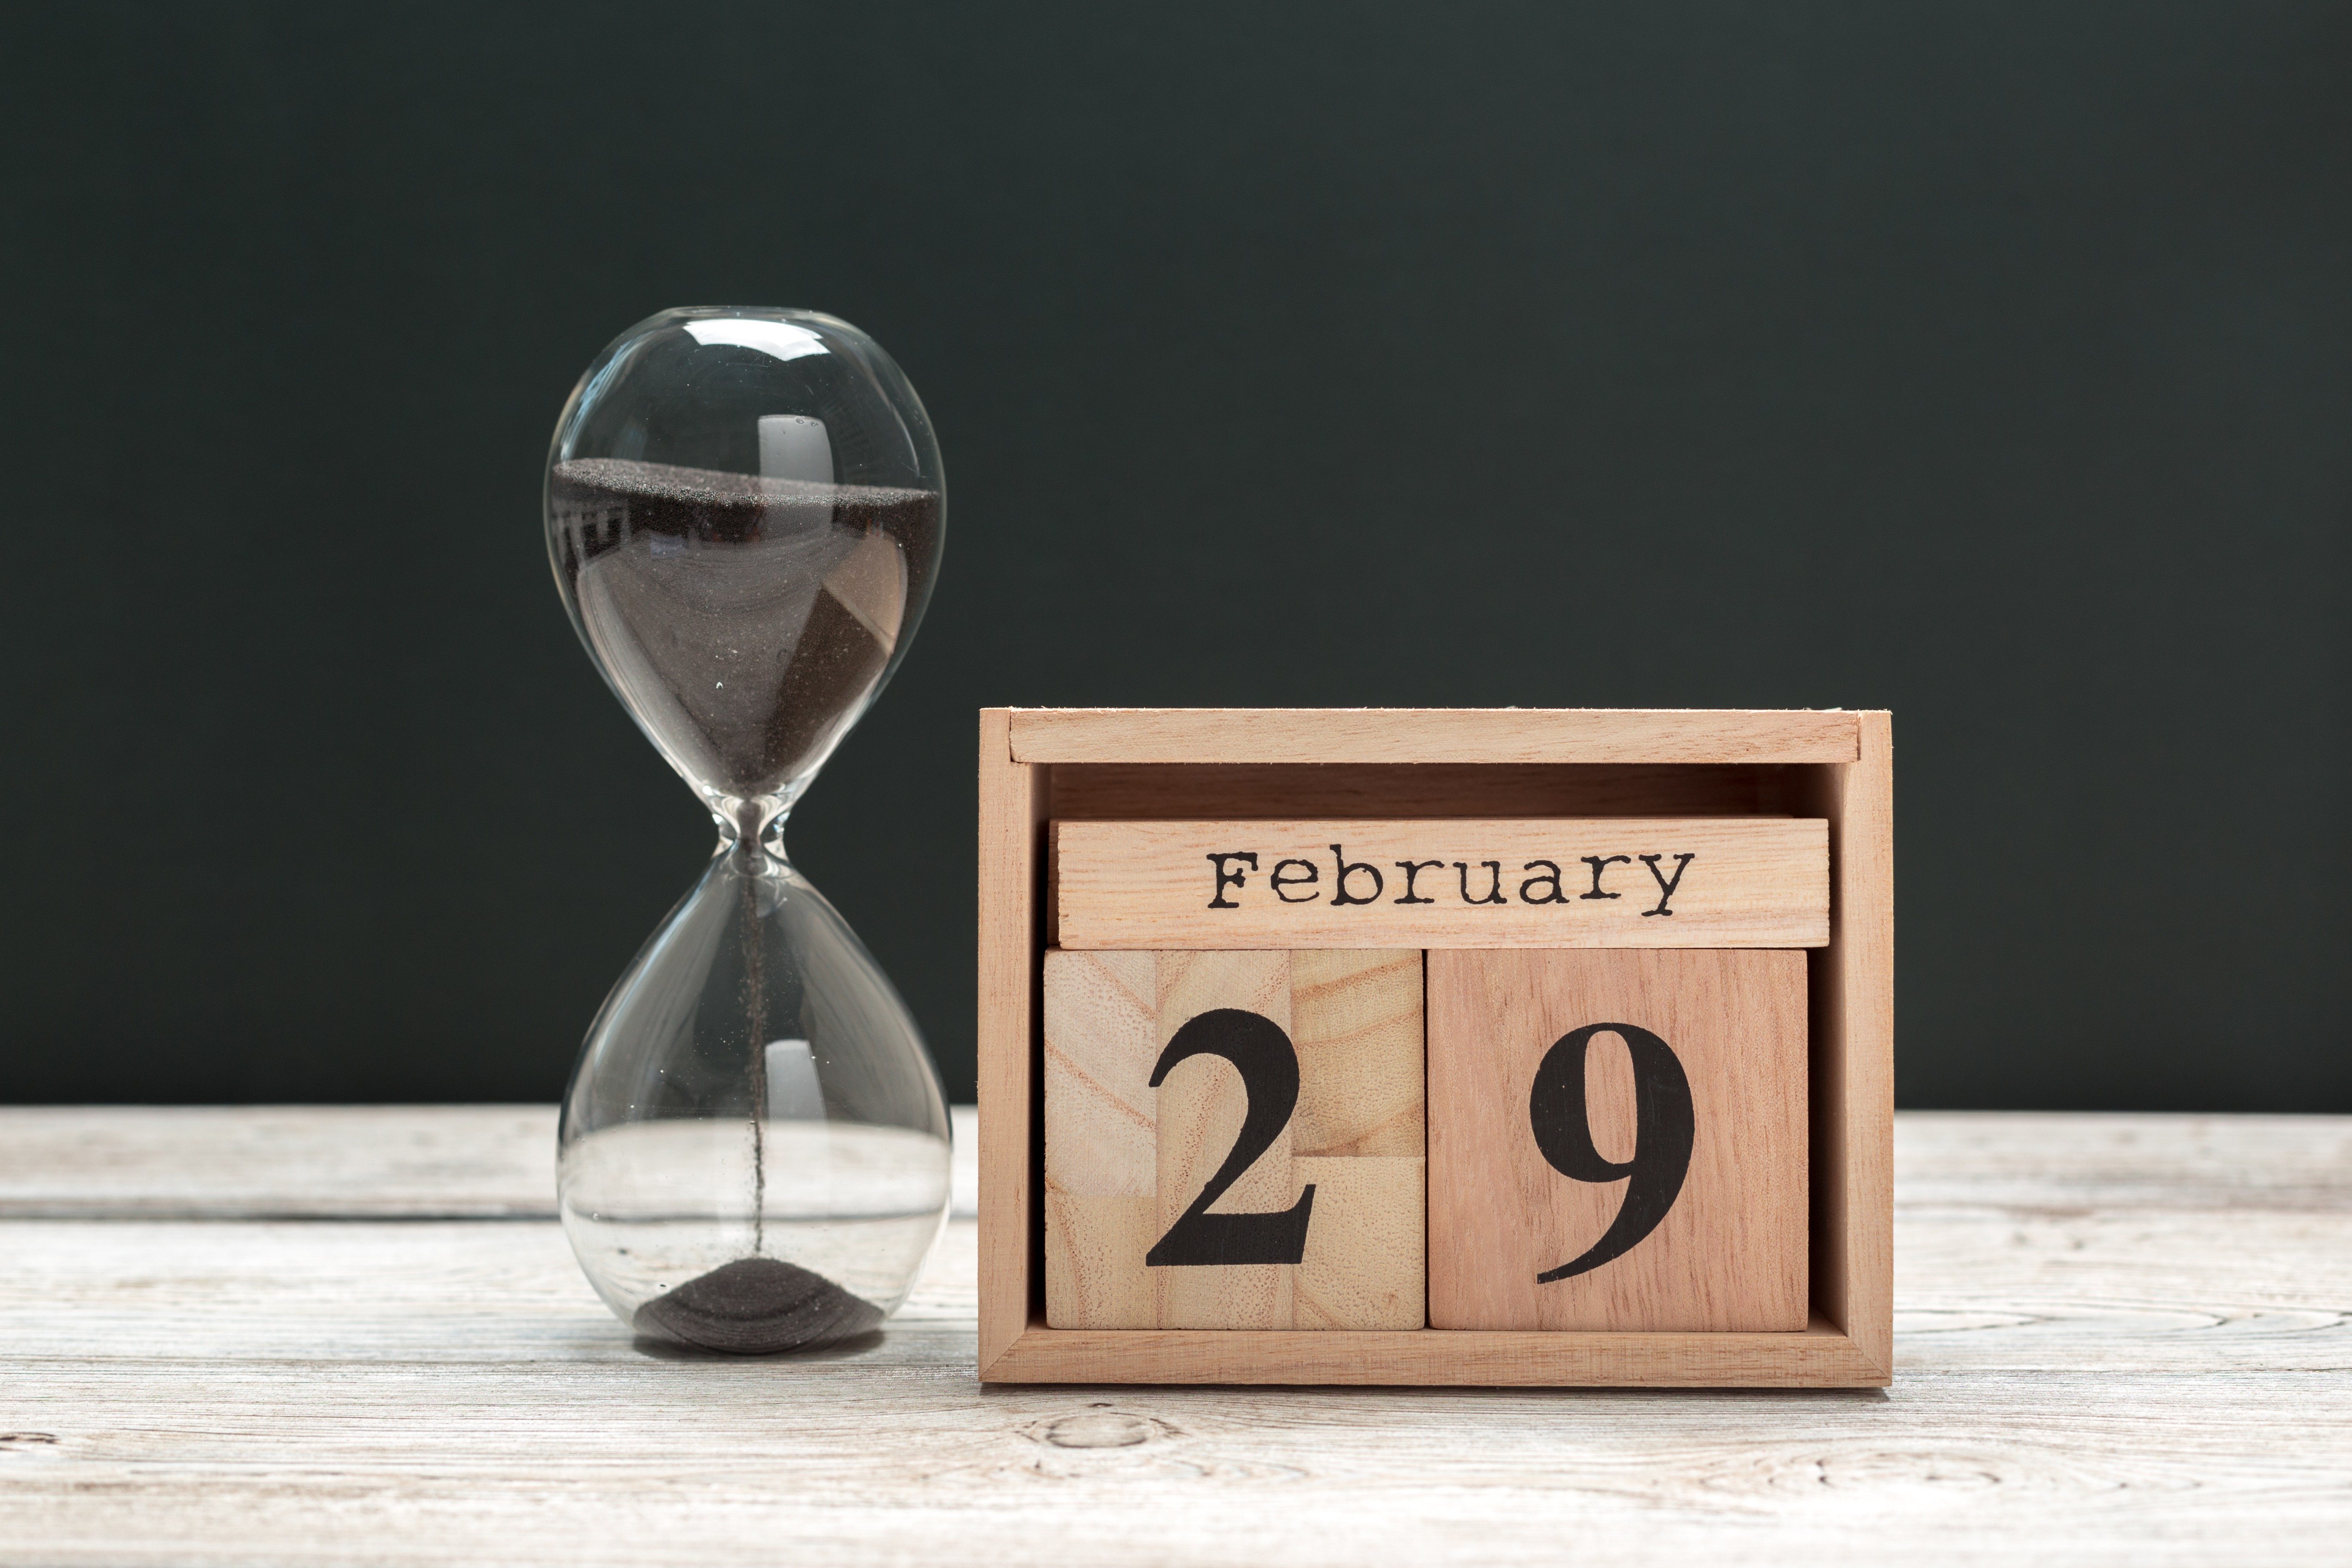 bizarre-leap-year-facts-about-february-29th-reader-s-digest